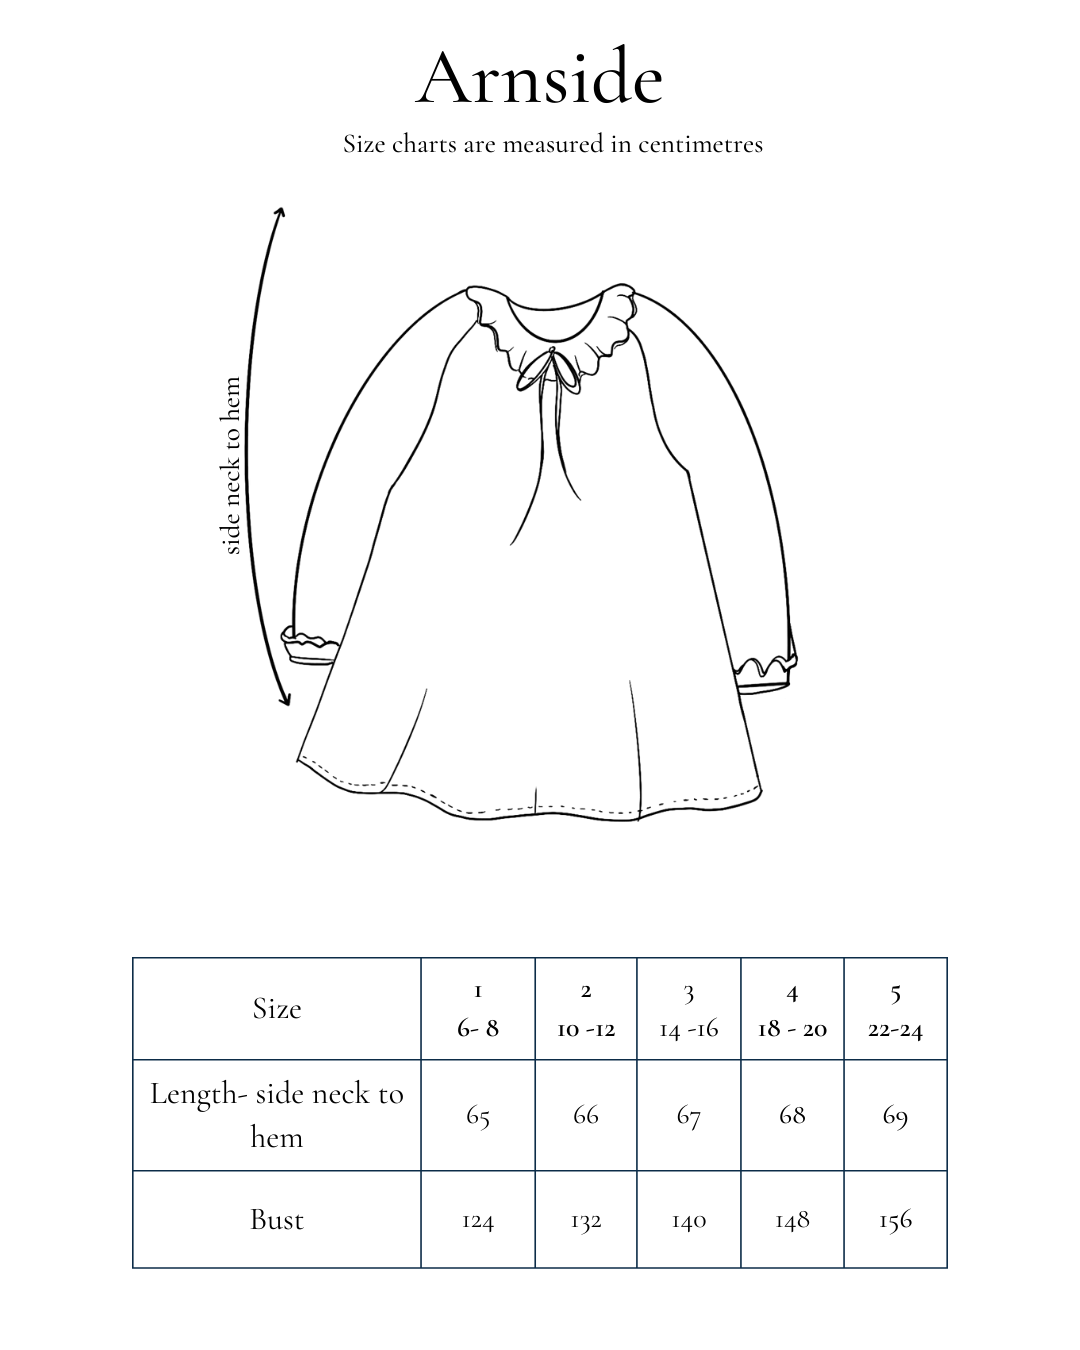 Garment measurement chart for Arnside - raglan sleeve blouse with gathered neckline and face framing frill.